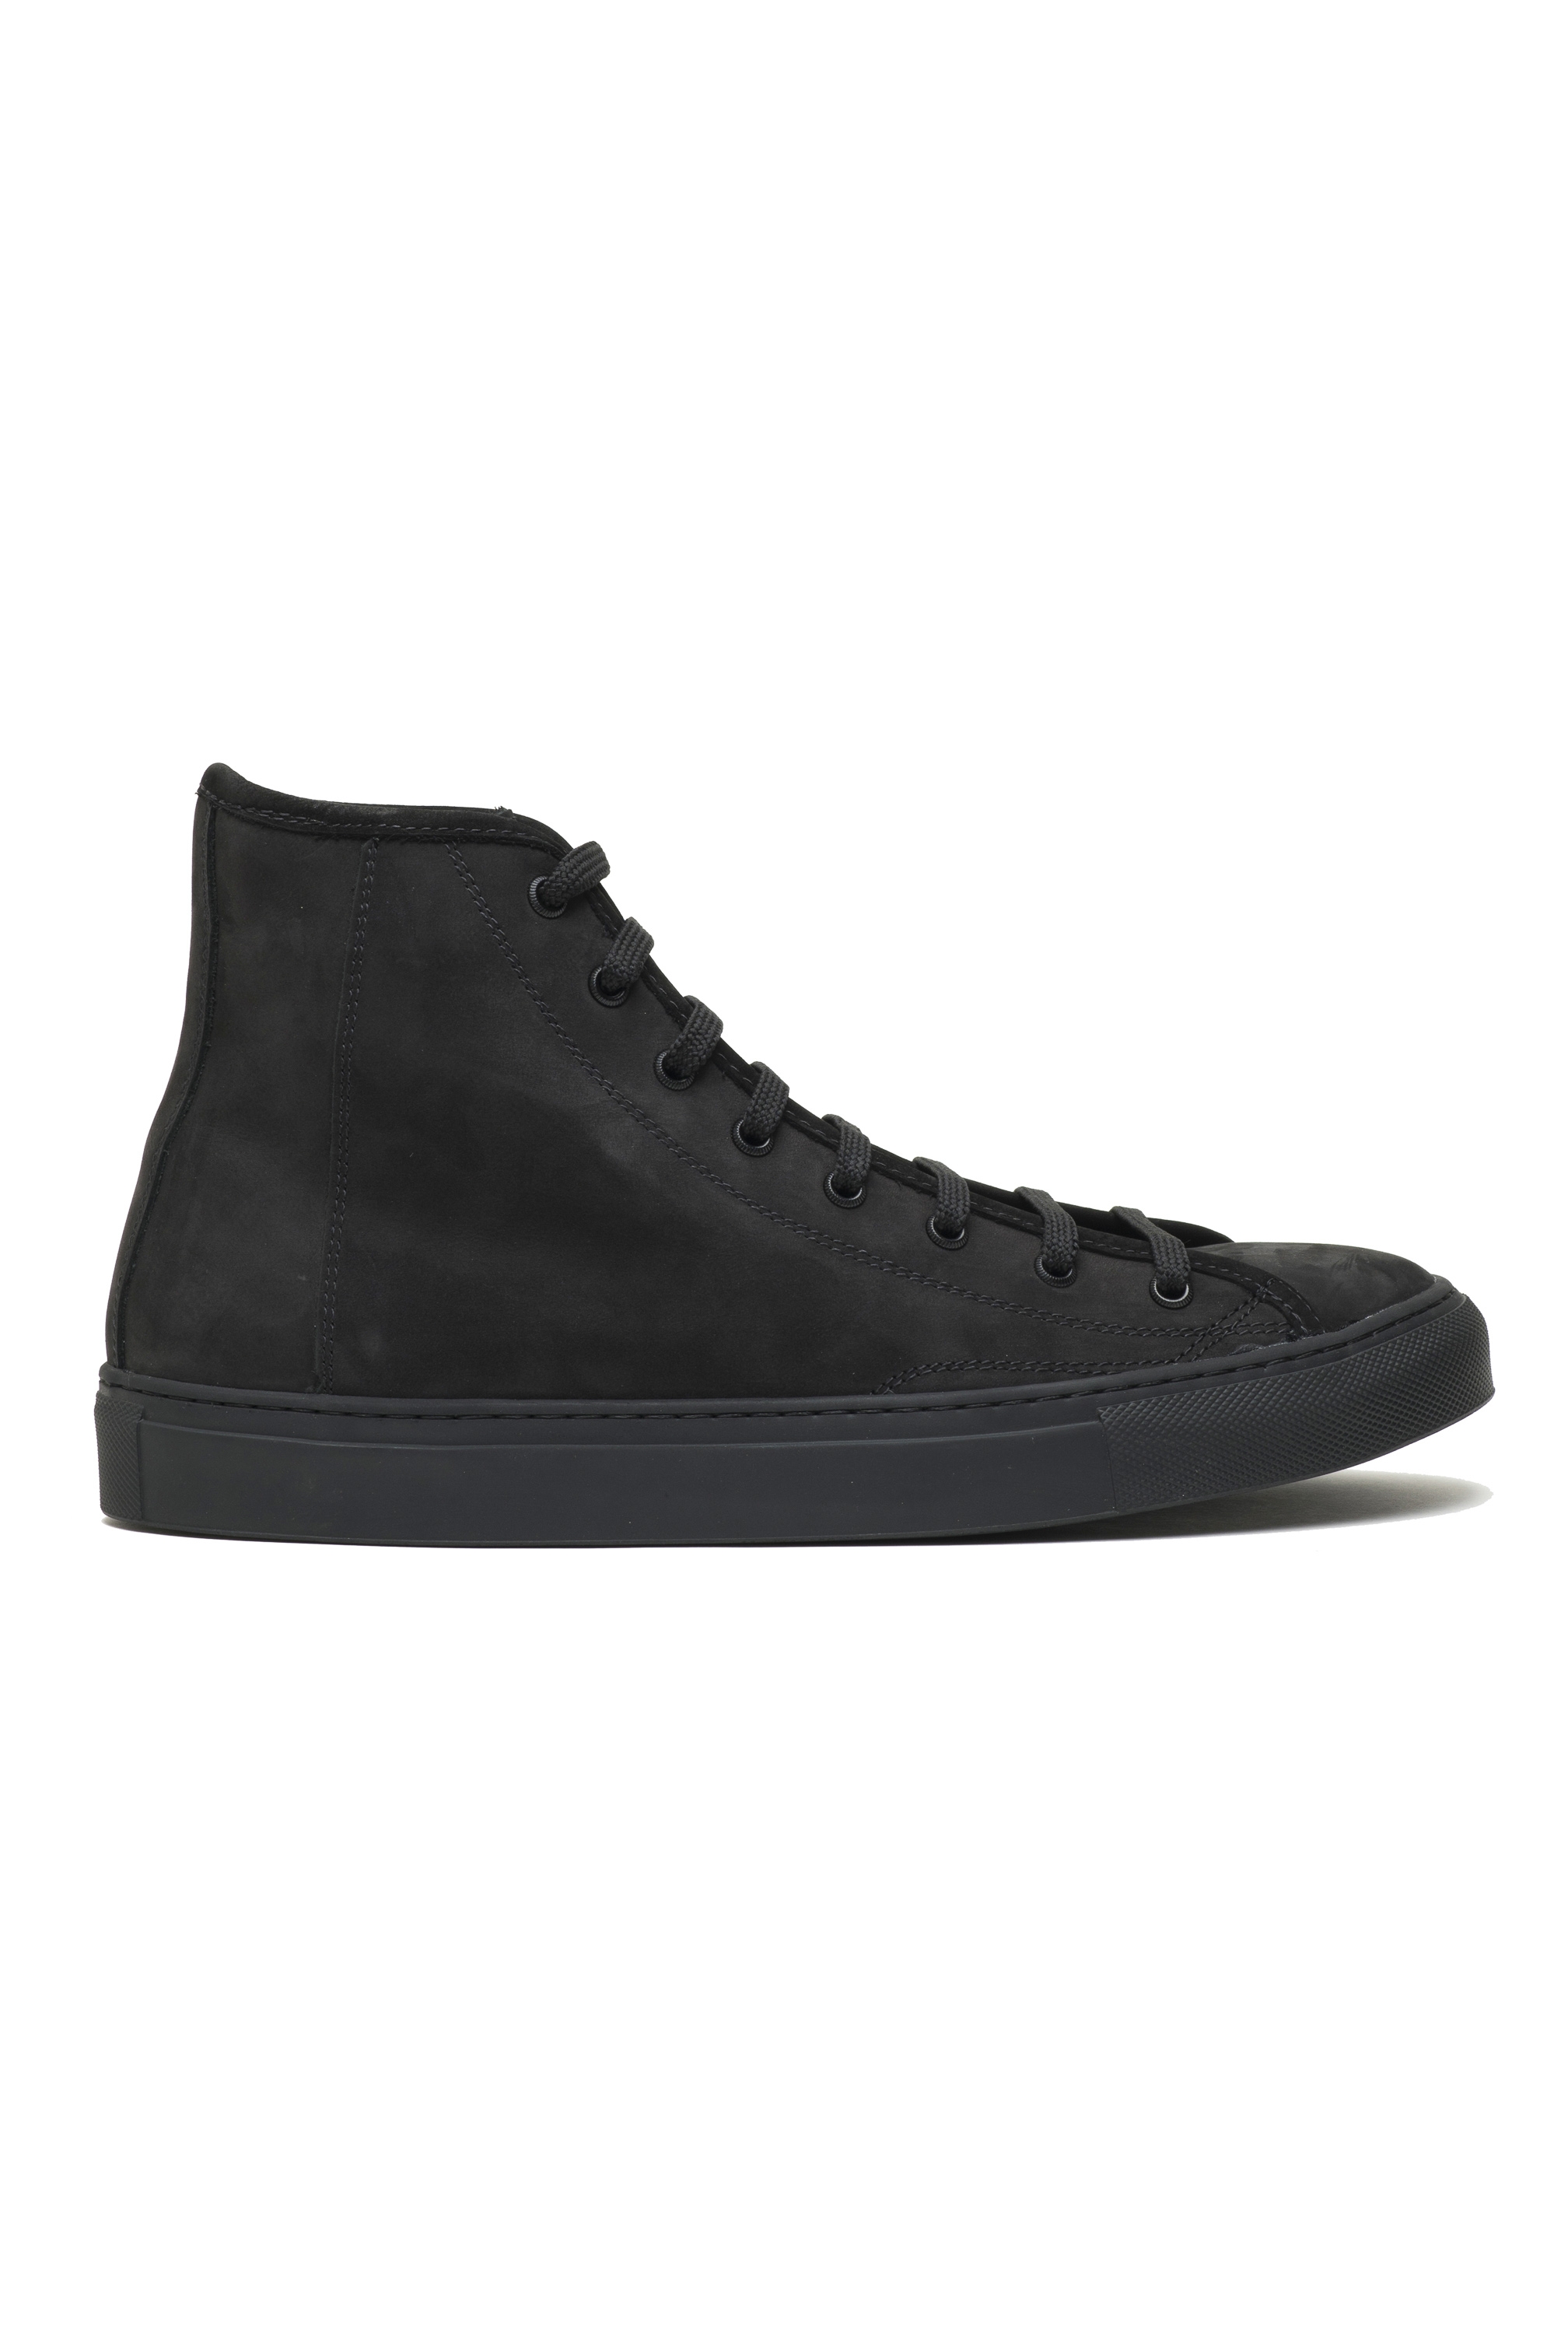 SBU 03956_2022SS Mid top lace up sneakers in black nubuck leather 01